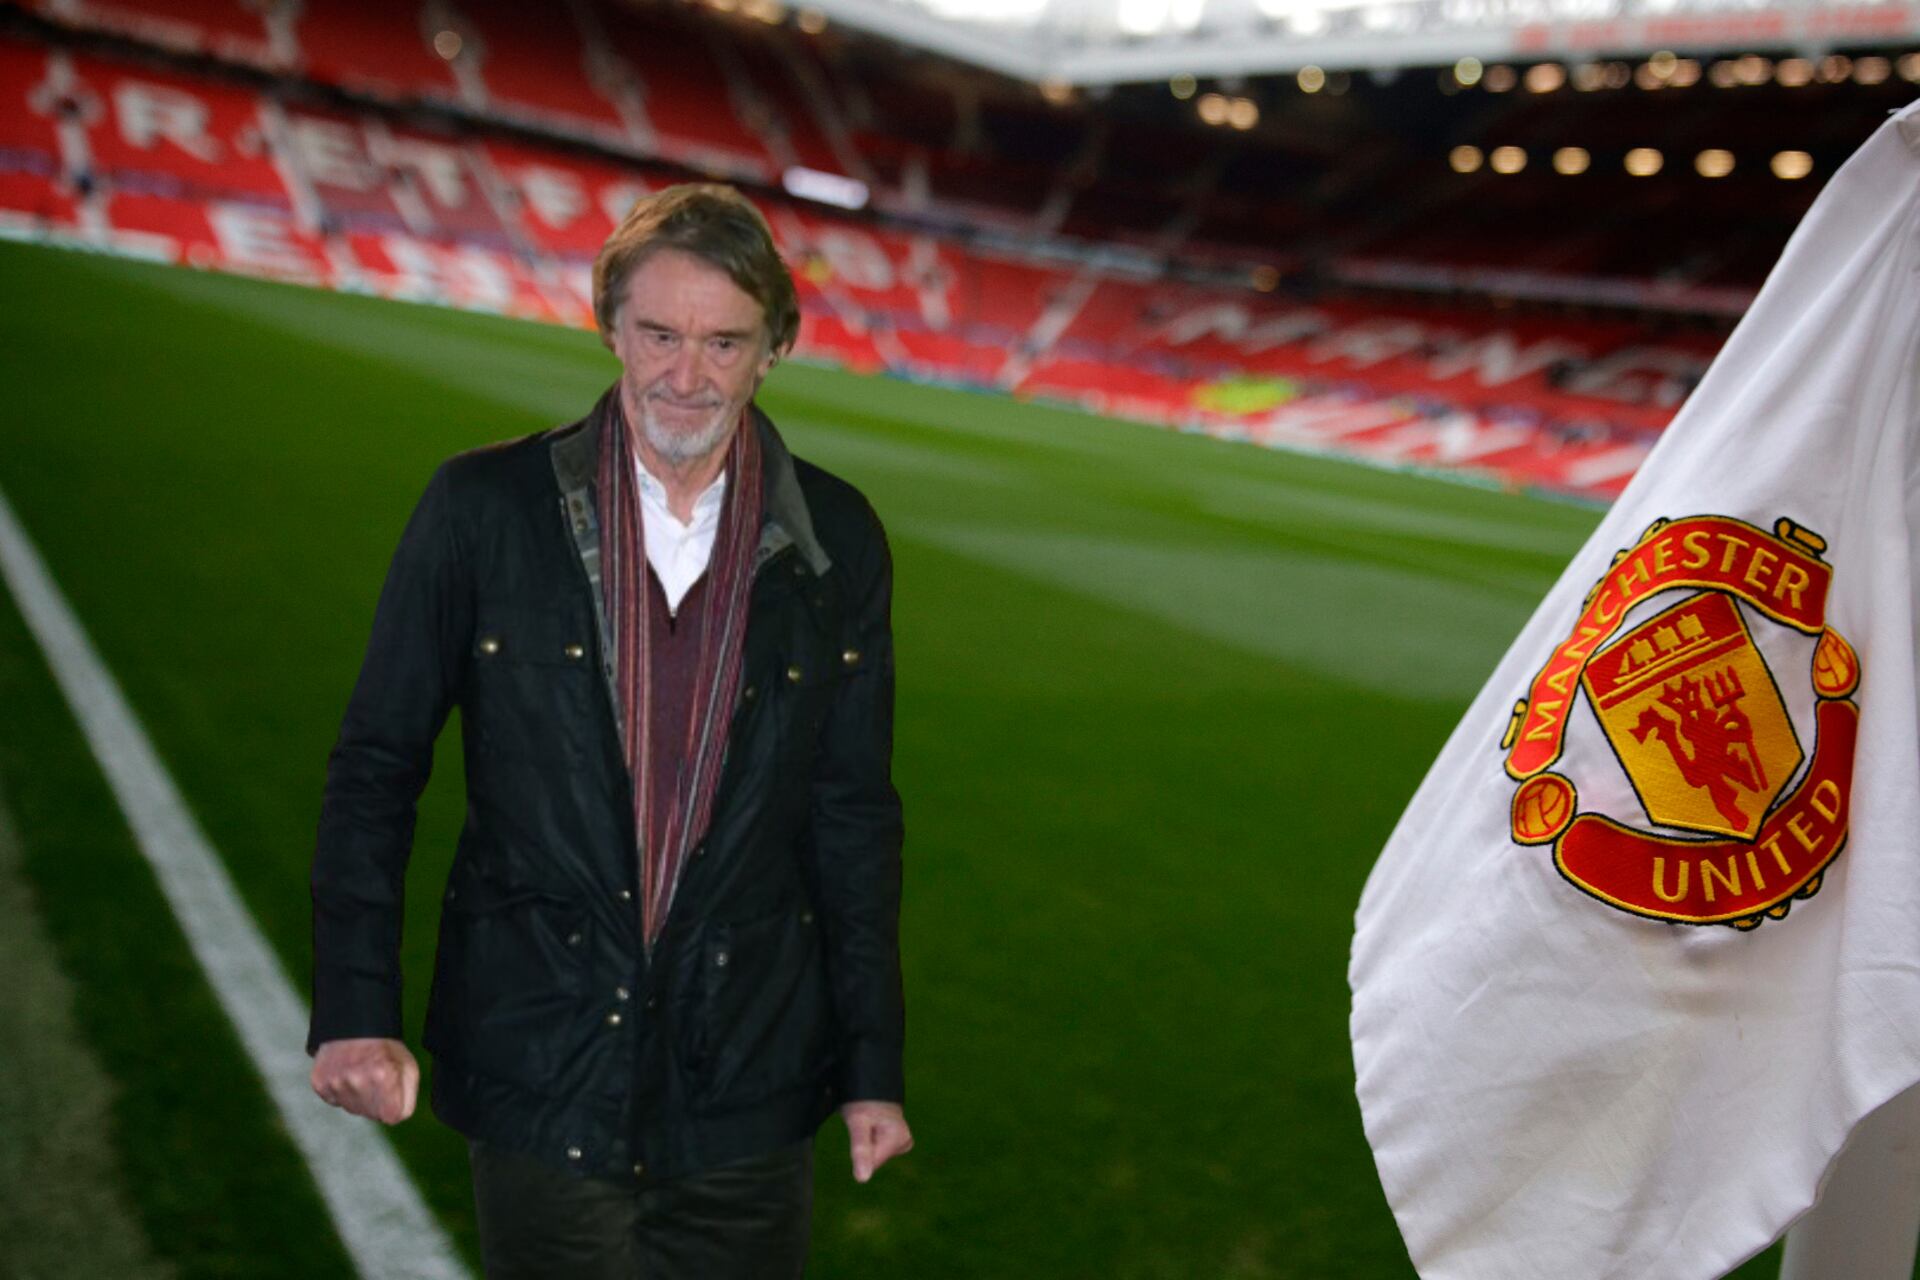 The players Sir Jim Ratcliffe plans to sell to bring money for Manchester United